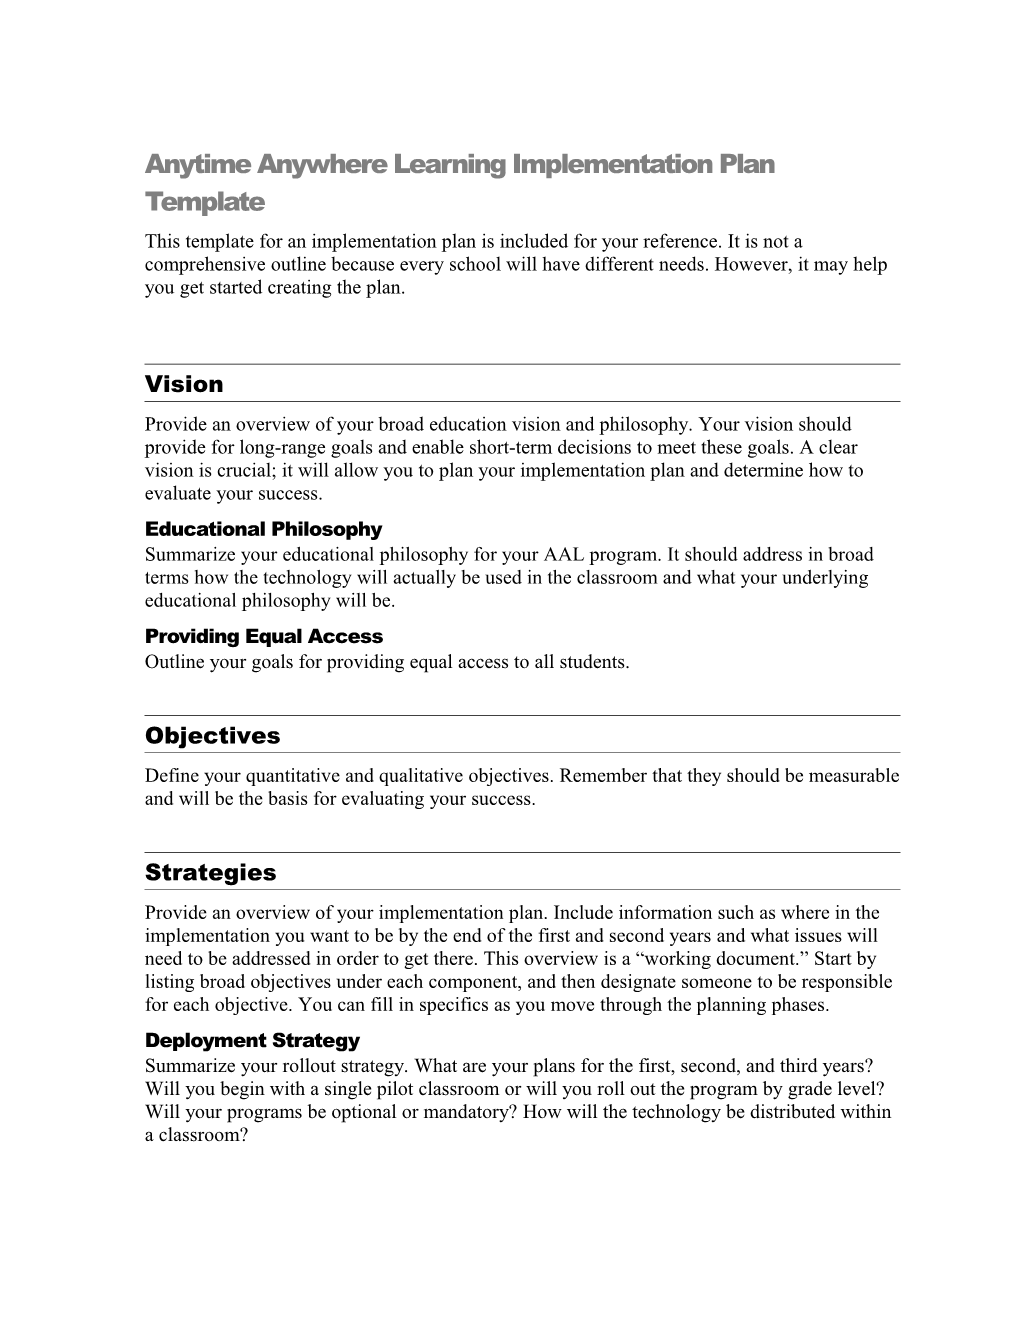 Anytime Anywhere Learning Implementation Plan Template